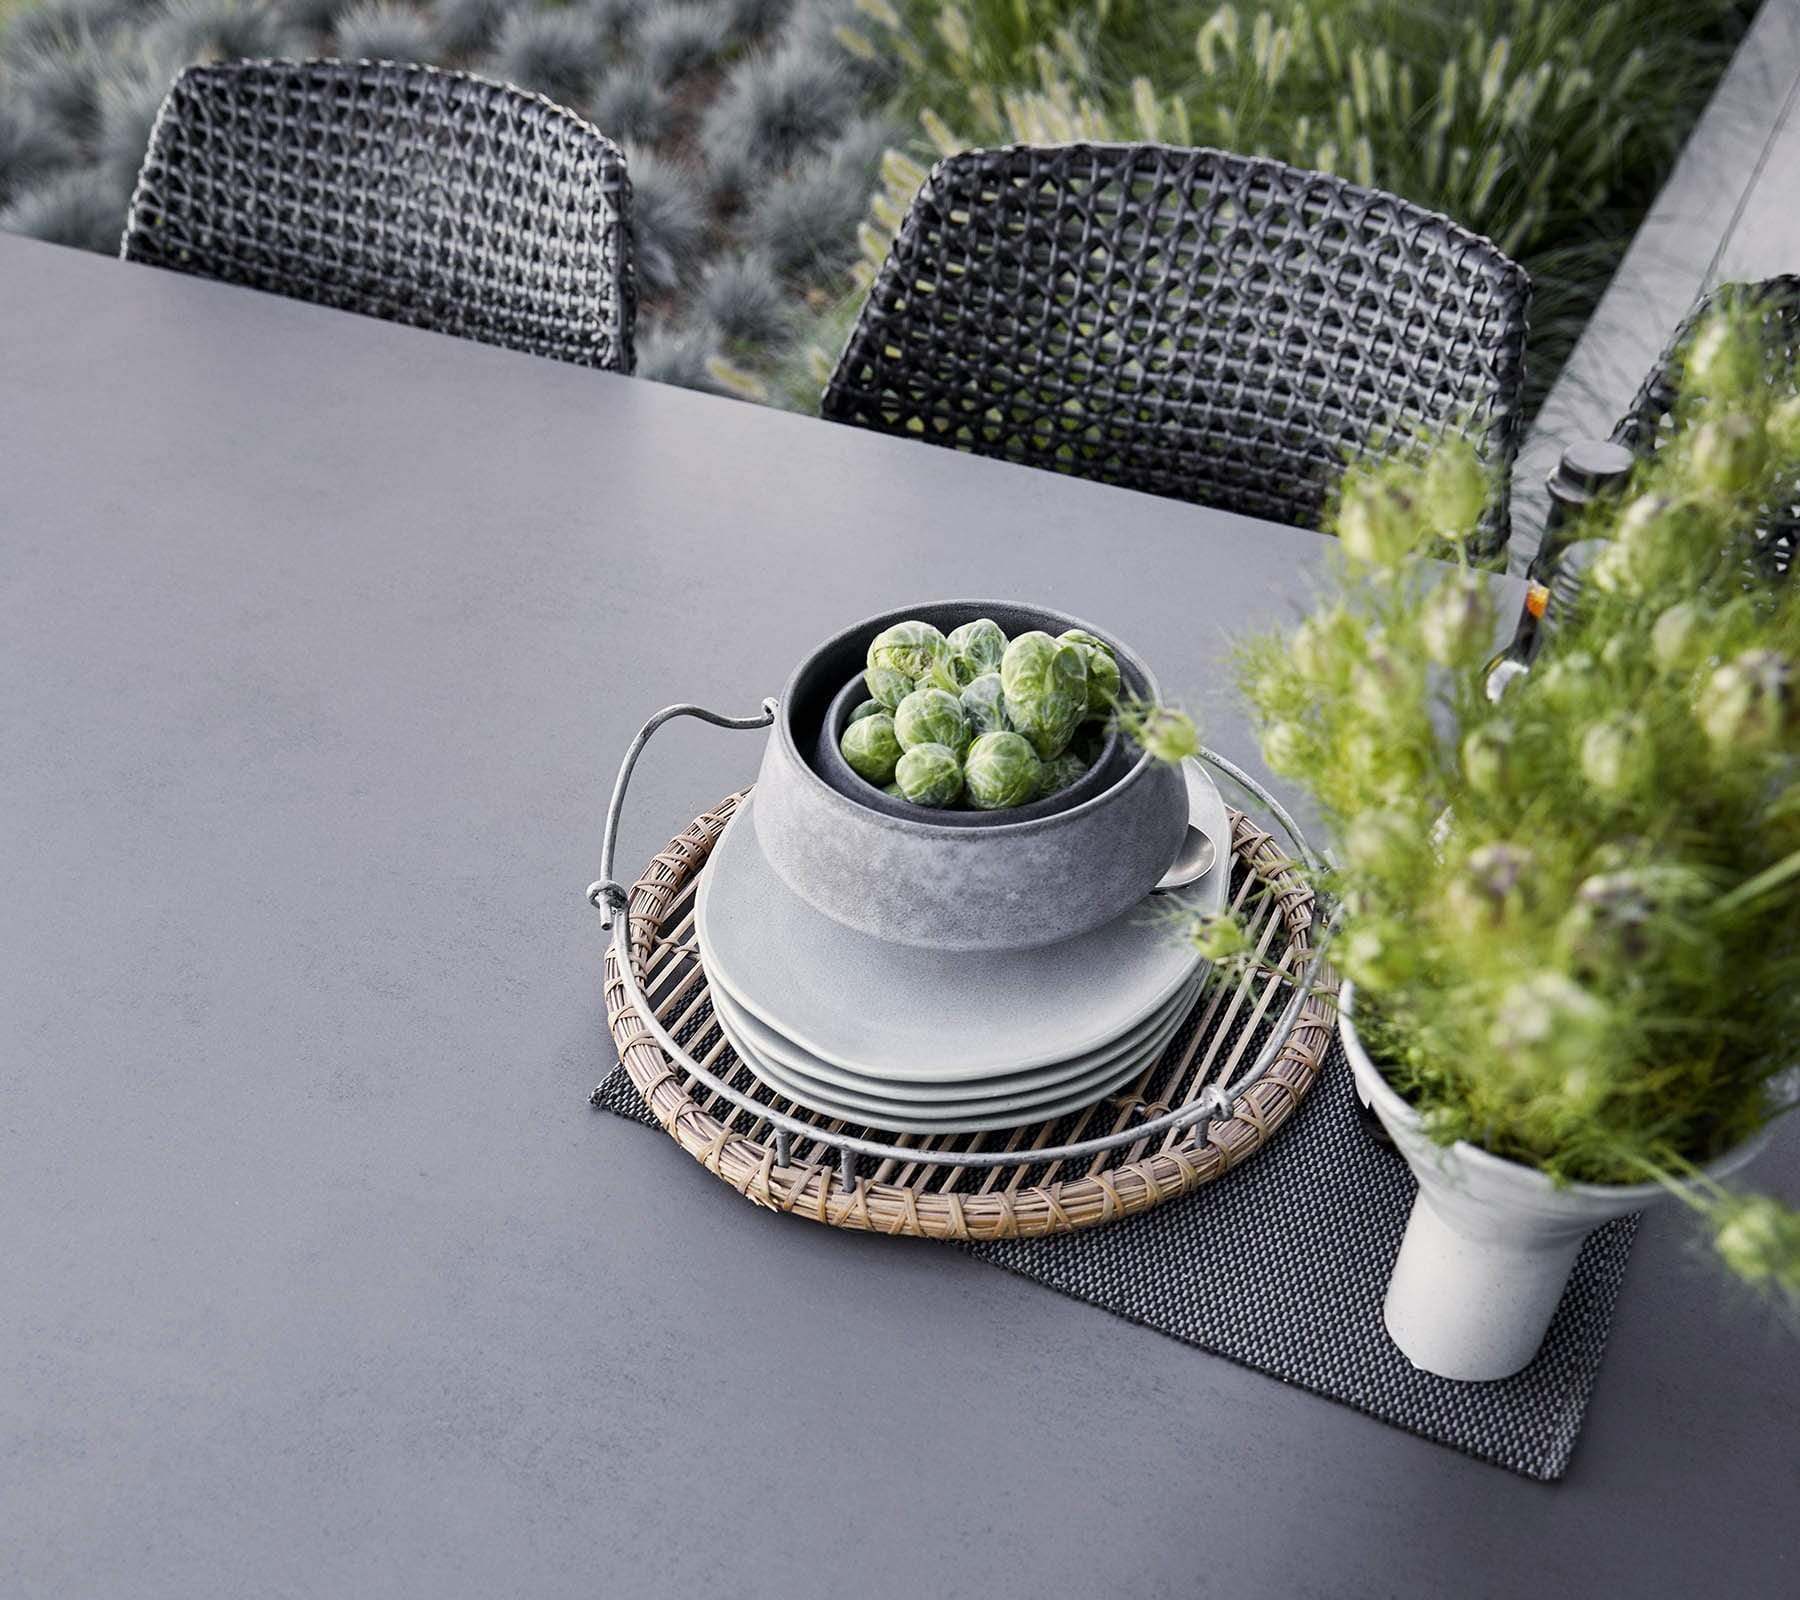 Boxhill's Vibe black outdoor armchair with dark grey outdoor dining table pile of plates and bowl on it